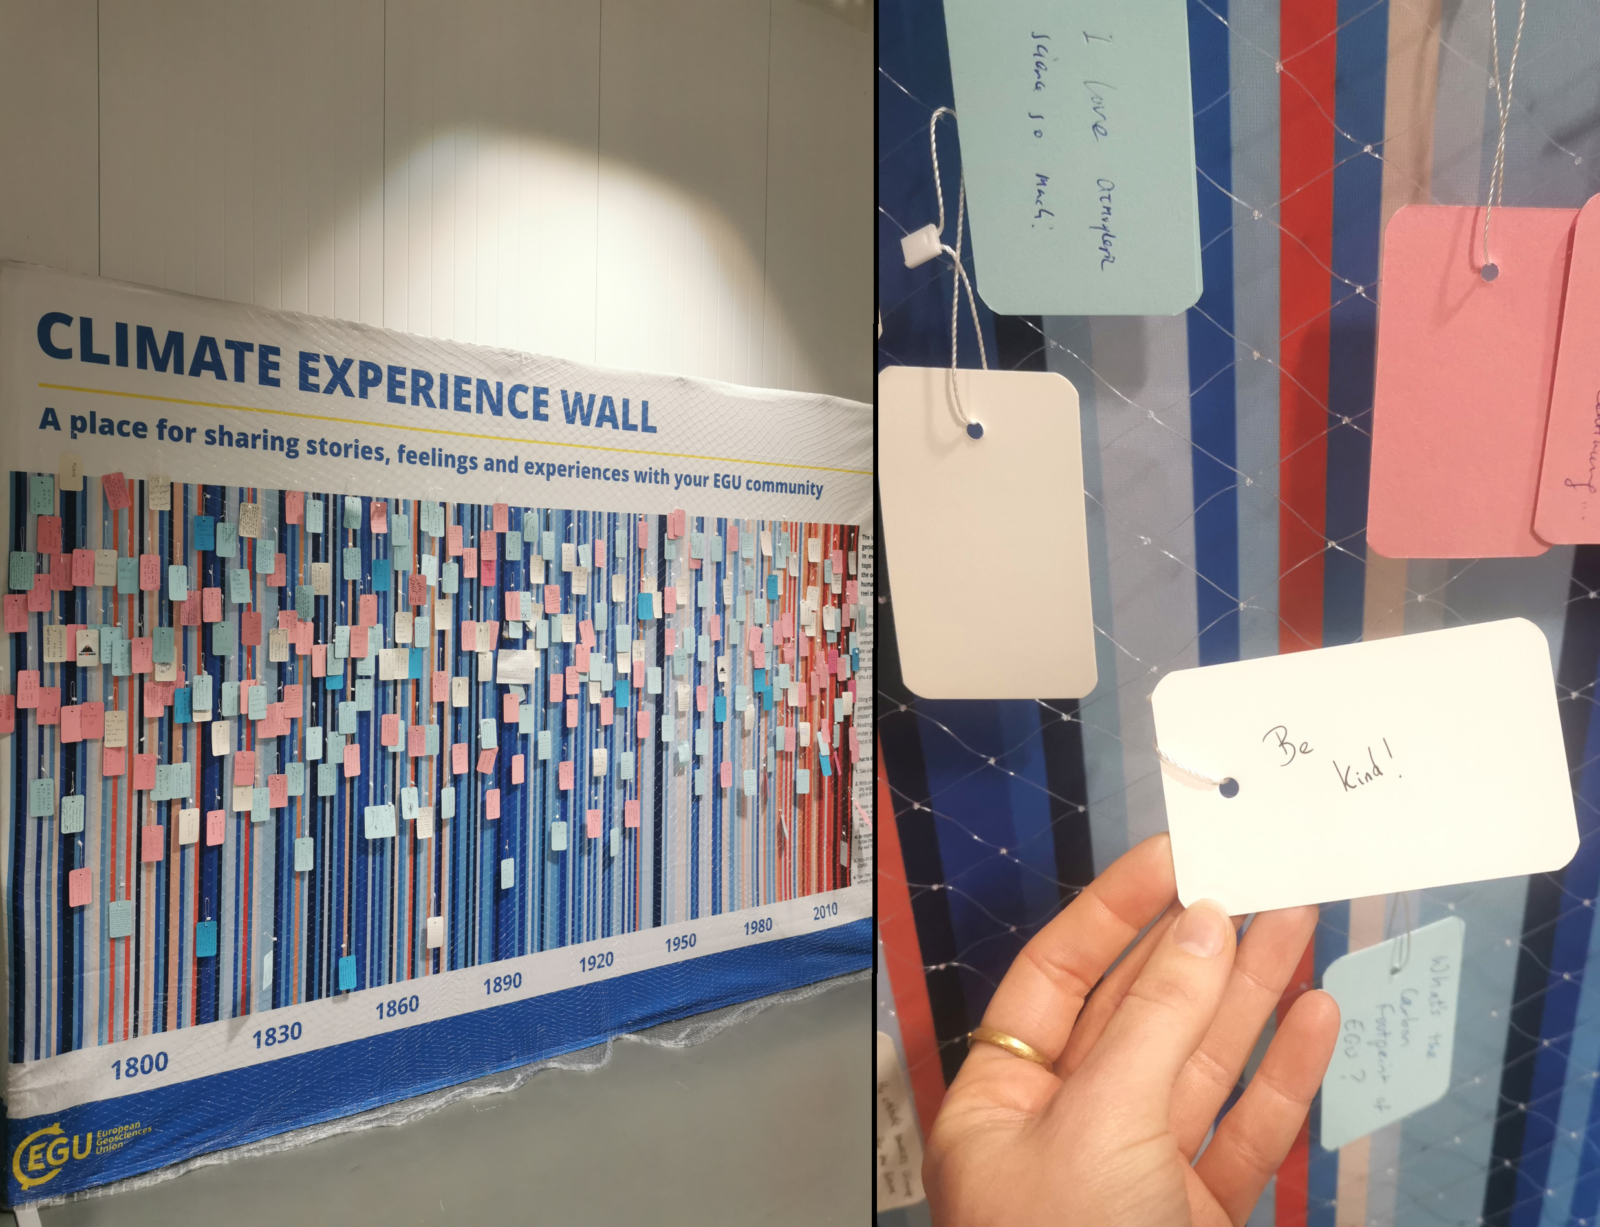 The left photo shows a wall with the climate stripes (blue to red) and a lot of message tags left on it. The right photo zooms in onto a message tag that says "Be Kind!"